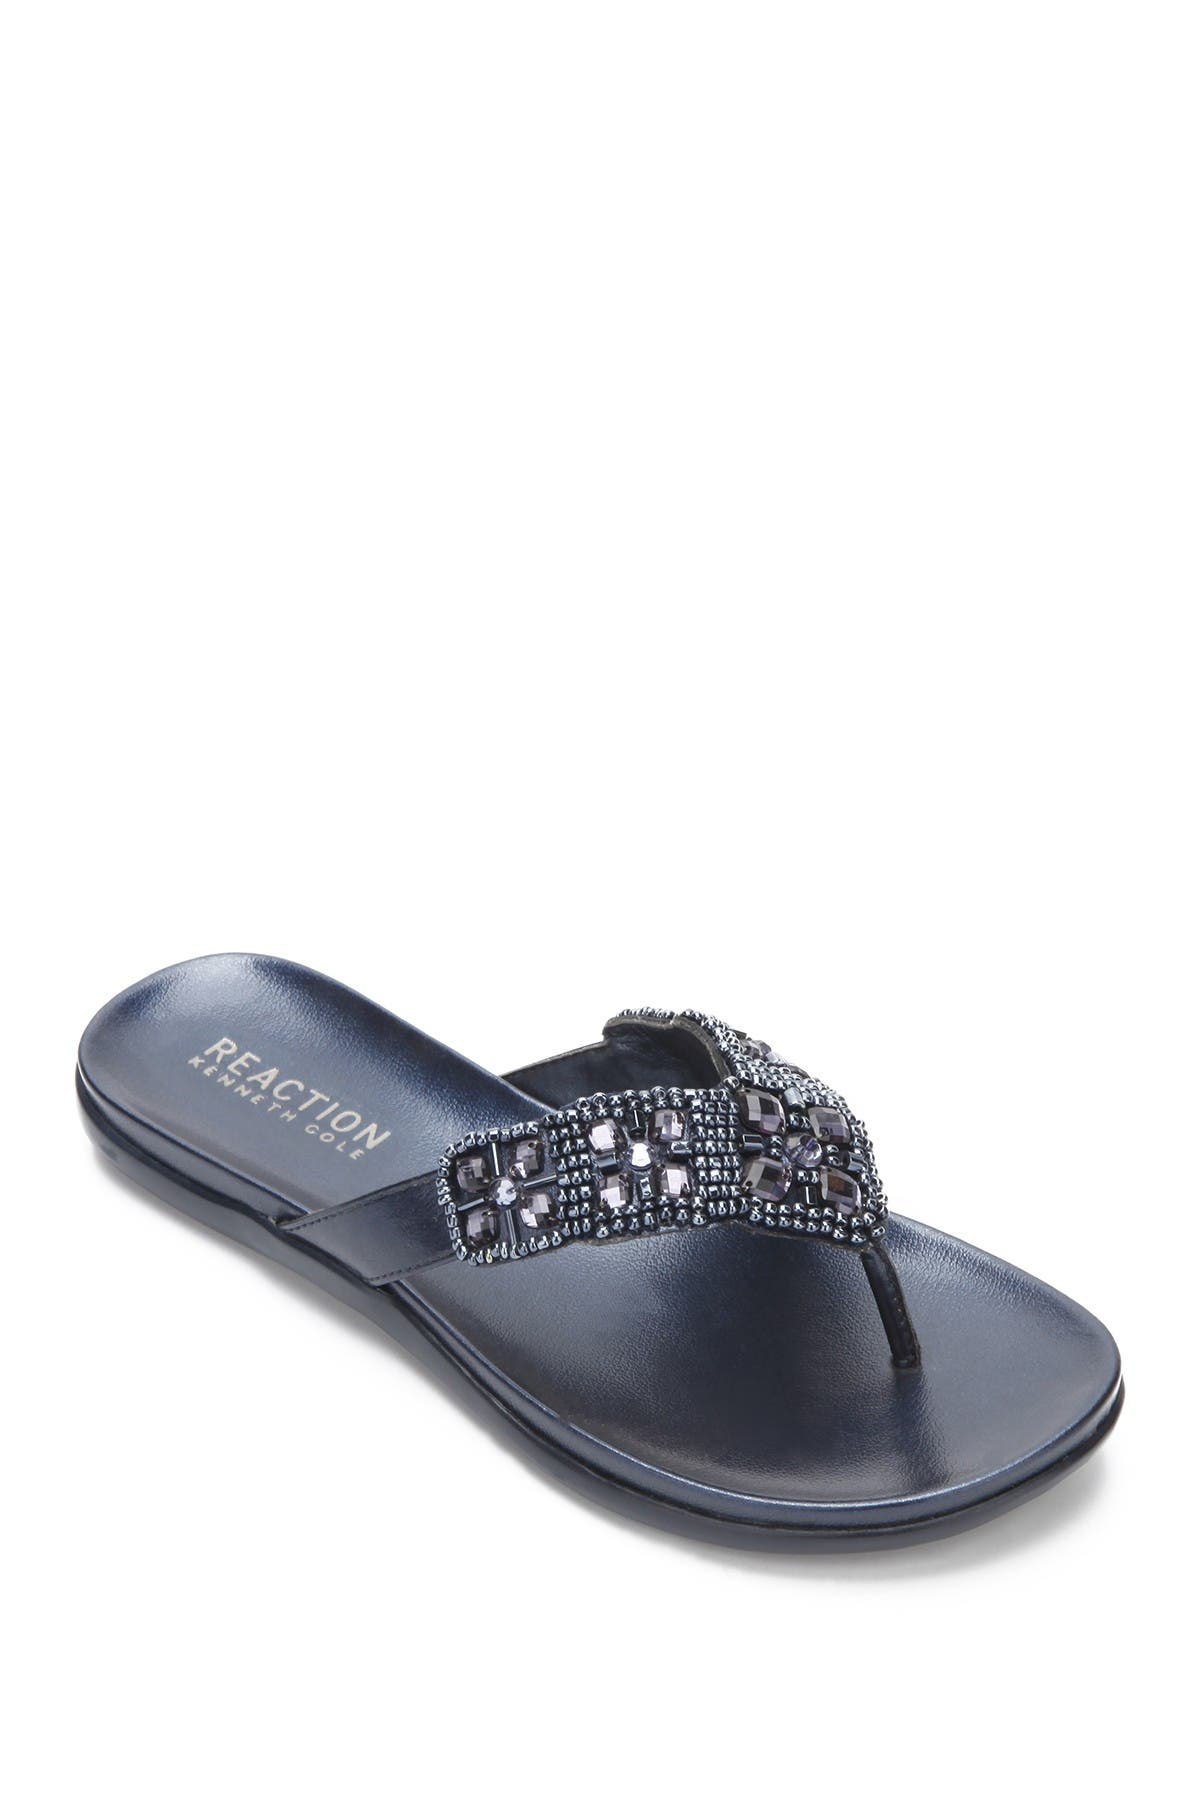 Kenneth Cole Reaction Glam-athon Embellished Thong Sandal In Navy1